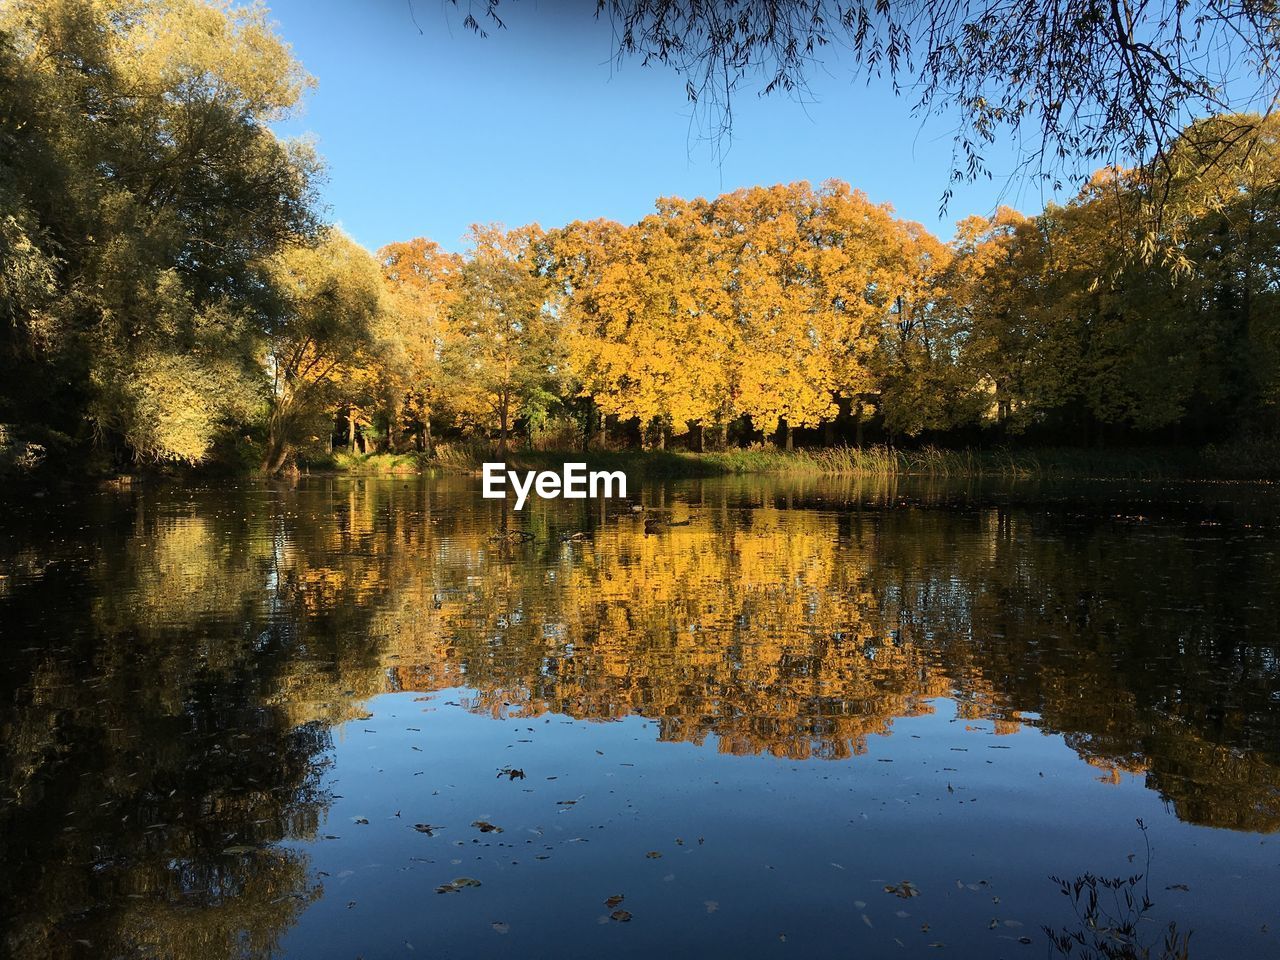 REFLECTION OF TREES IN LAKE DURING AUTUMN